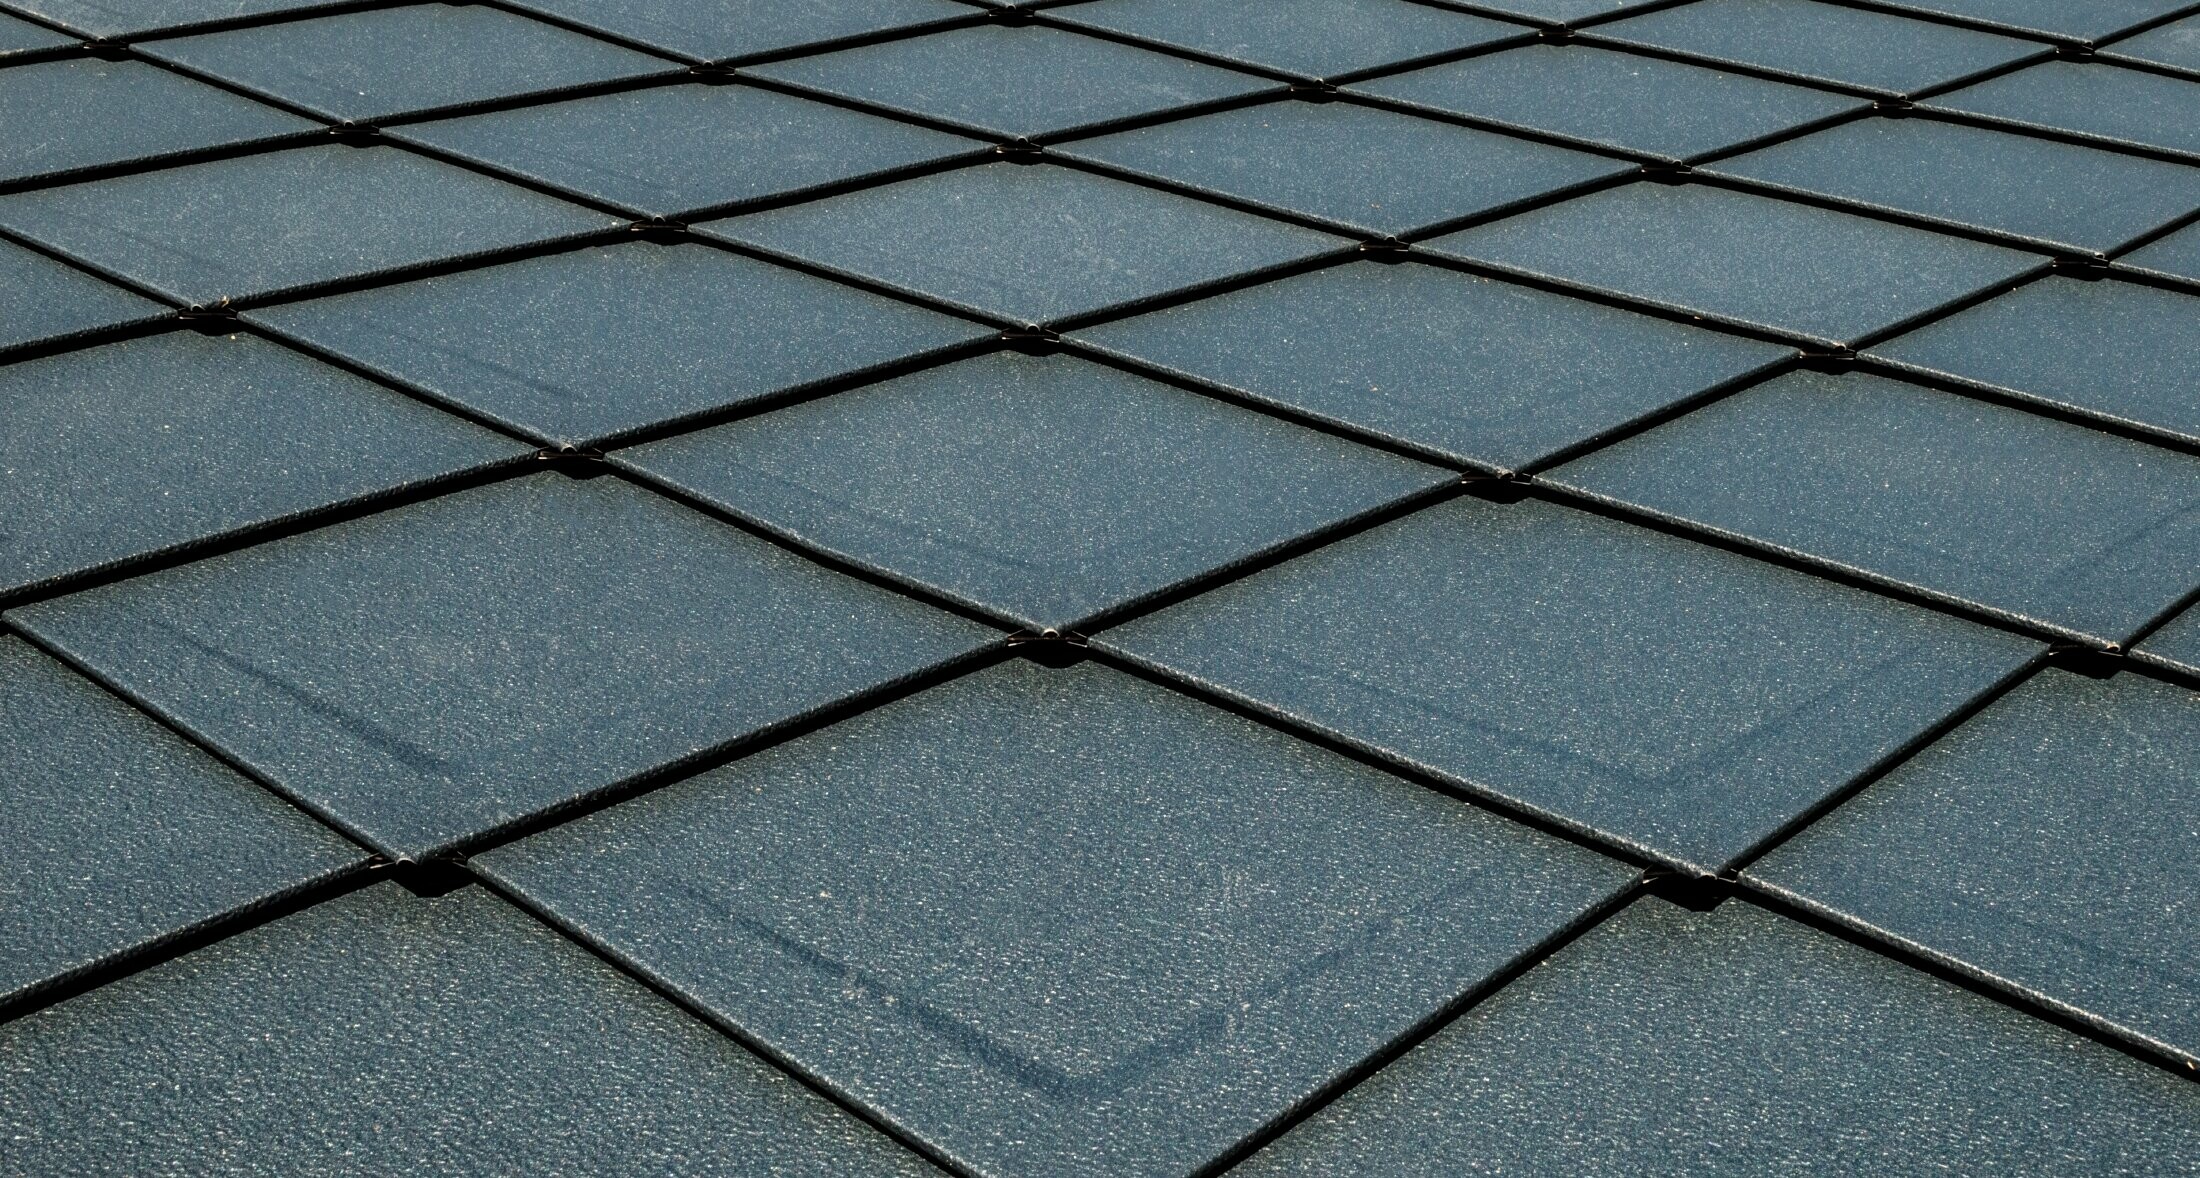 PREFA rhomboid roof tiles 29 × 29 in P.10 anthracite with beading installed as a surface, roof with scaly appearance